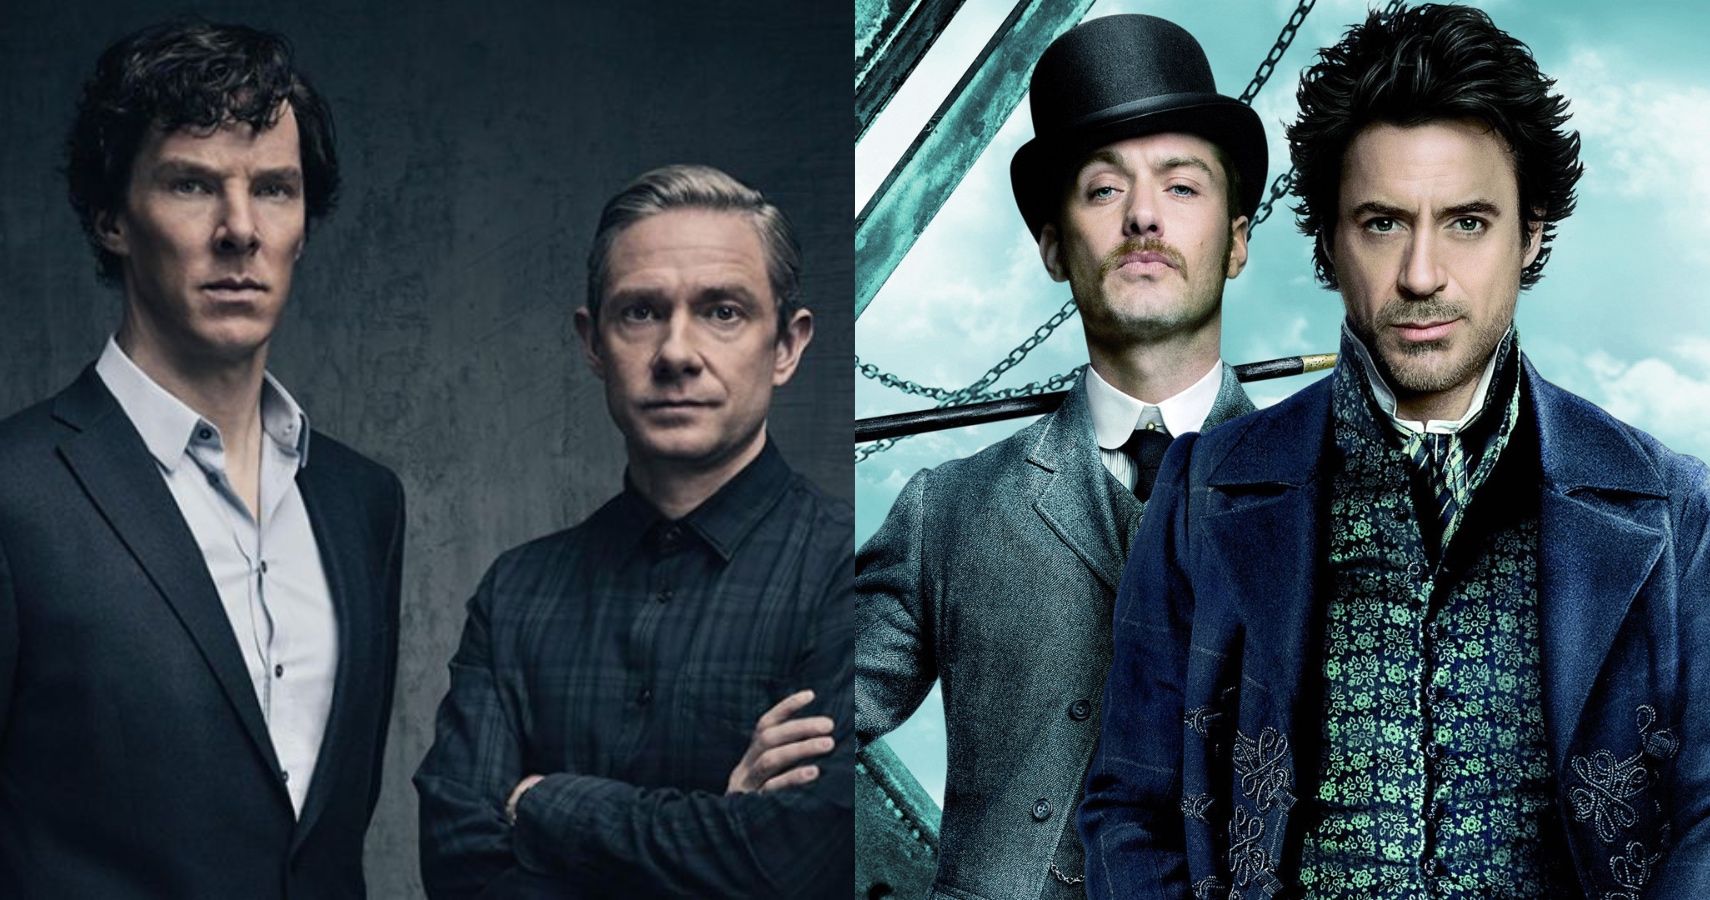 Sherlock Holmes 5 Similarities Between The Film Reboots & The BBC Series (& 5 Differences)